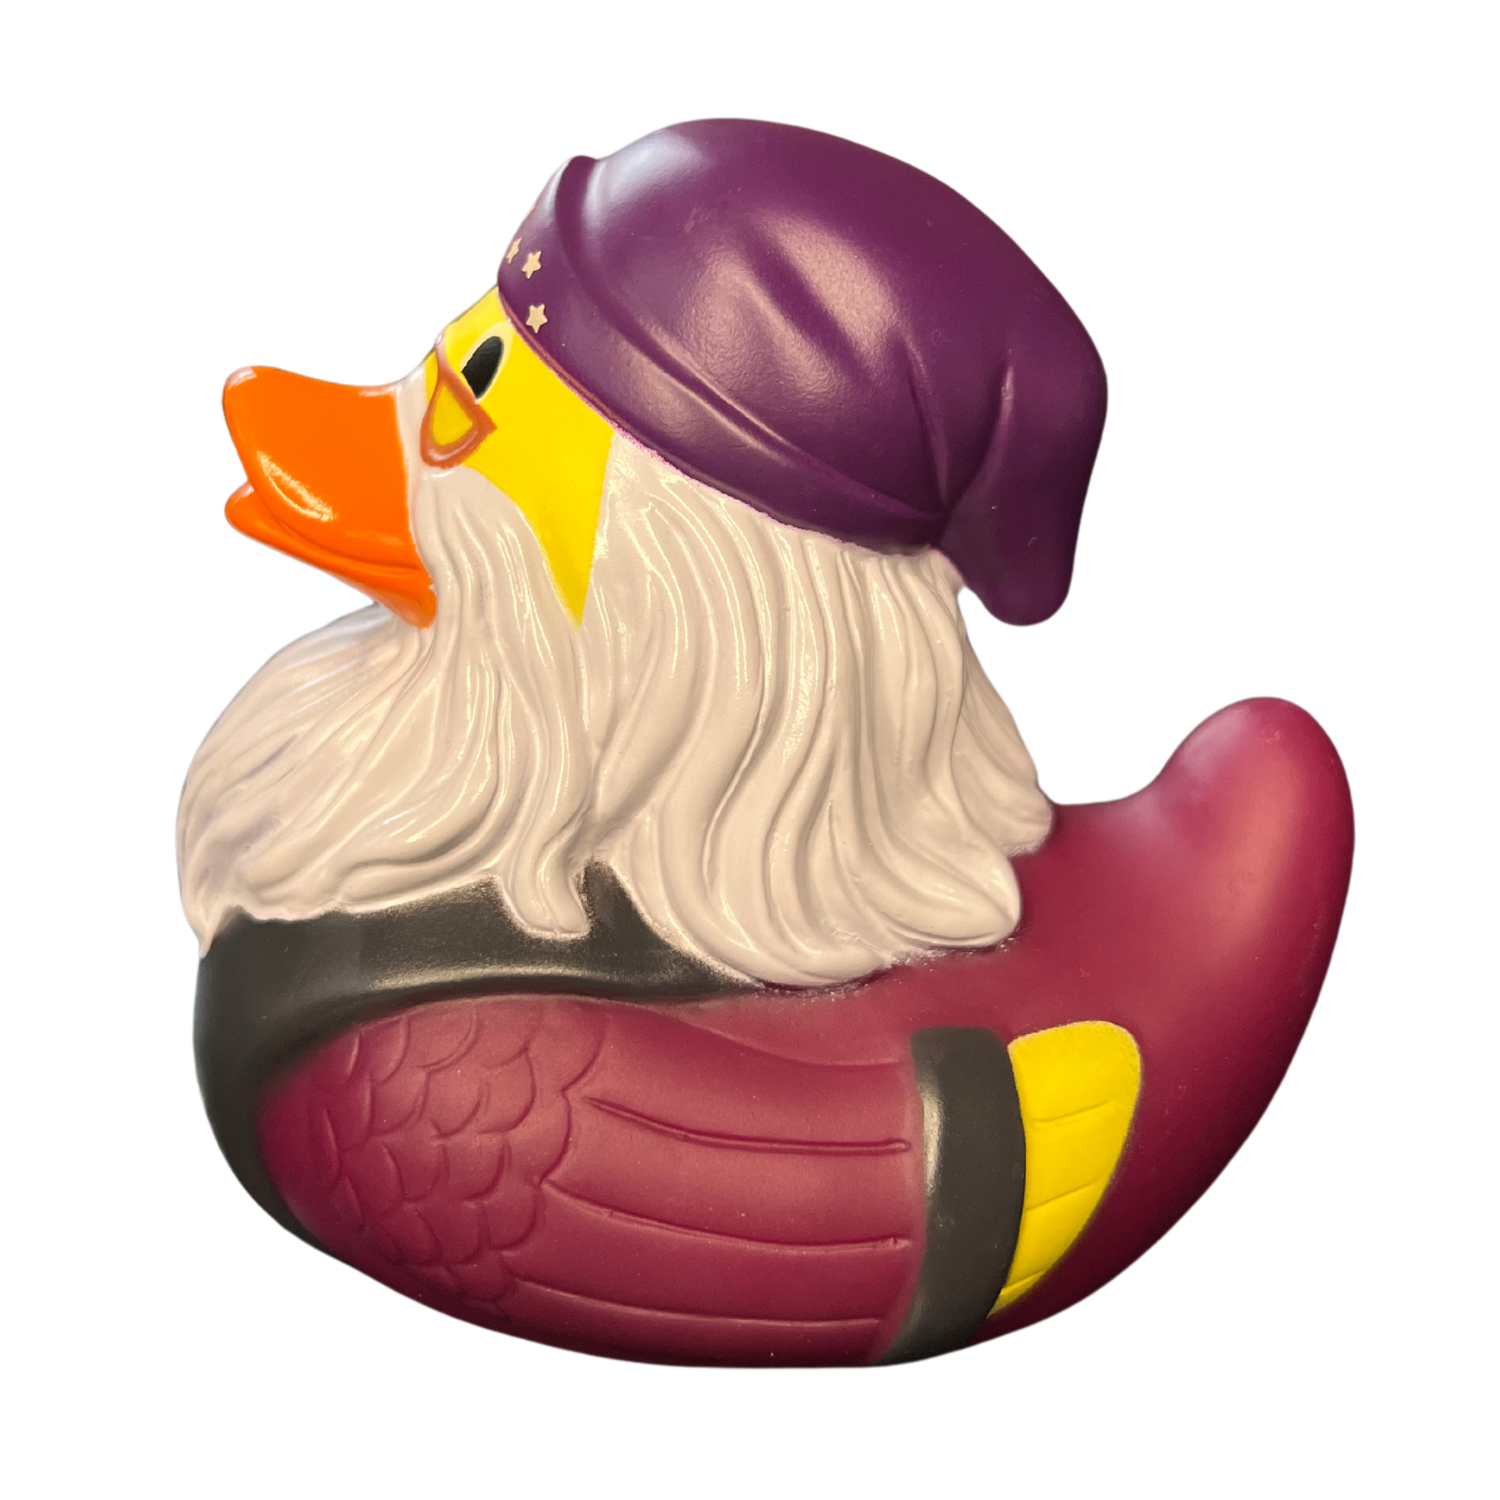 Grand Wizard Rubber Duck Side View